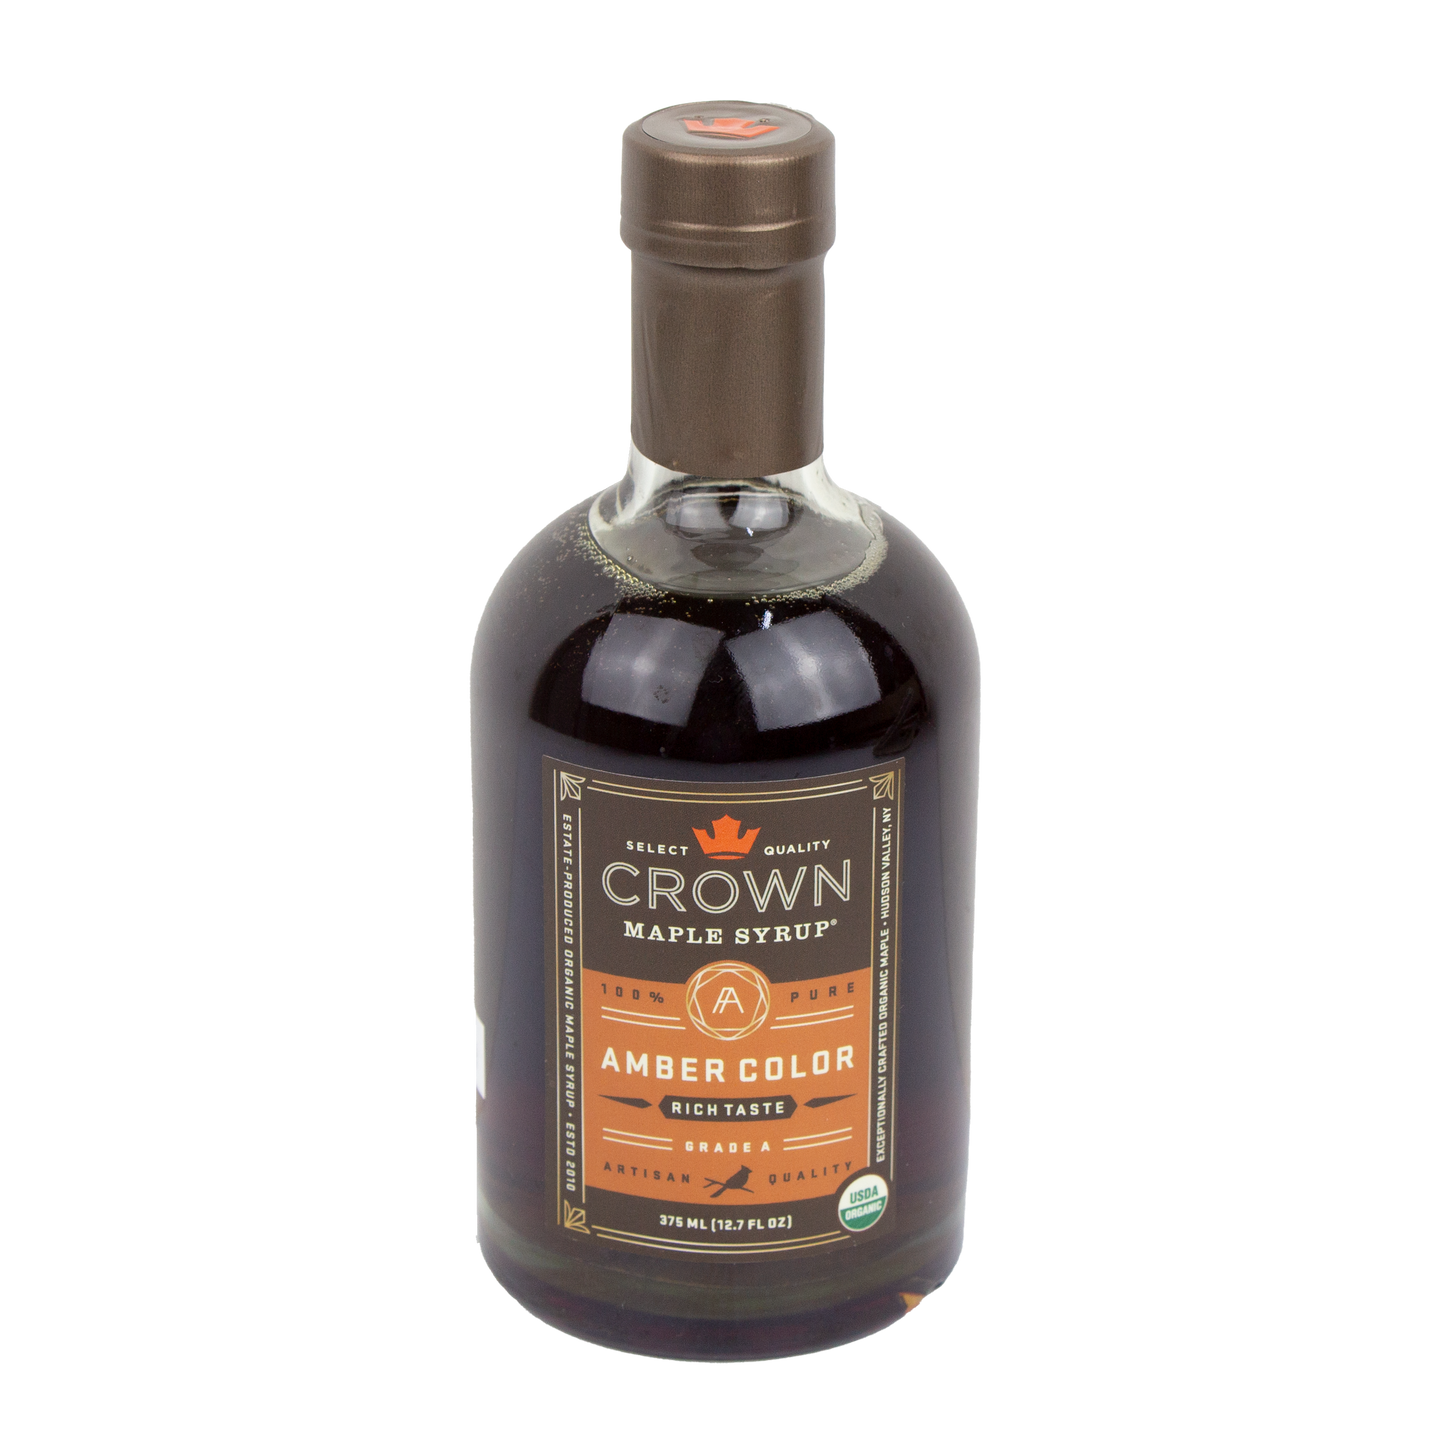 Crown Maple Syrup - Amber Color Grade A (12.7 oz) (Store Pick-Up Only)